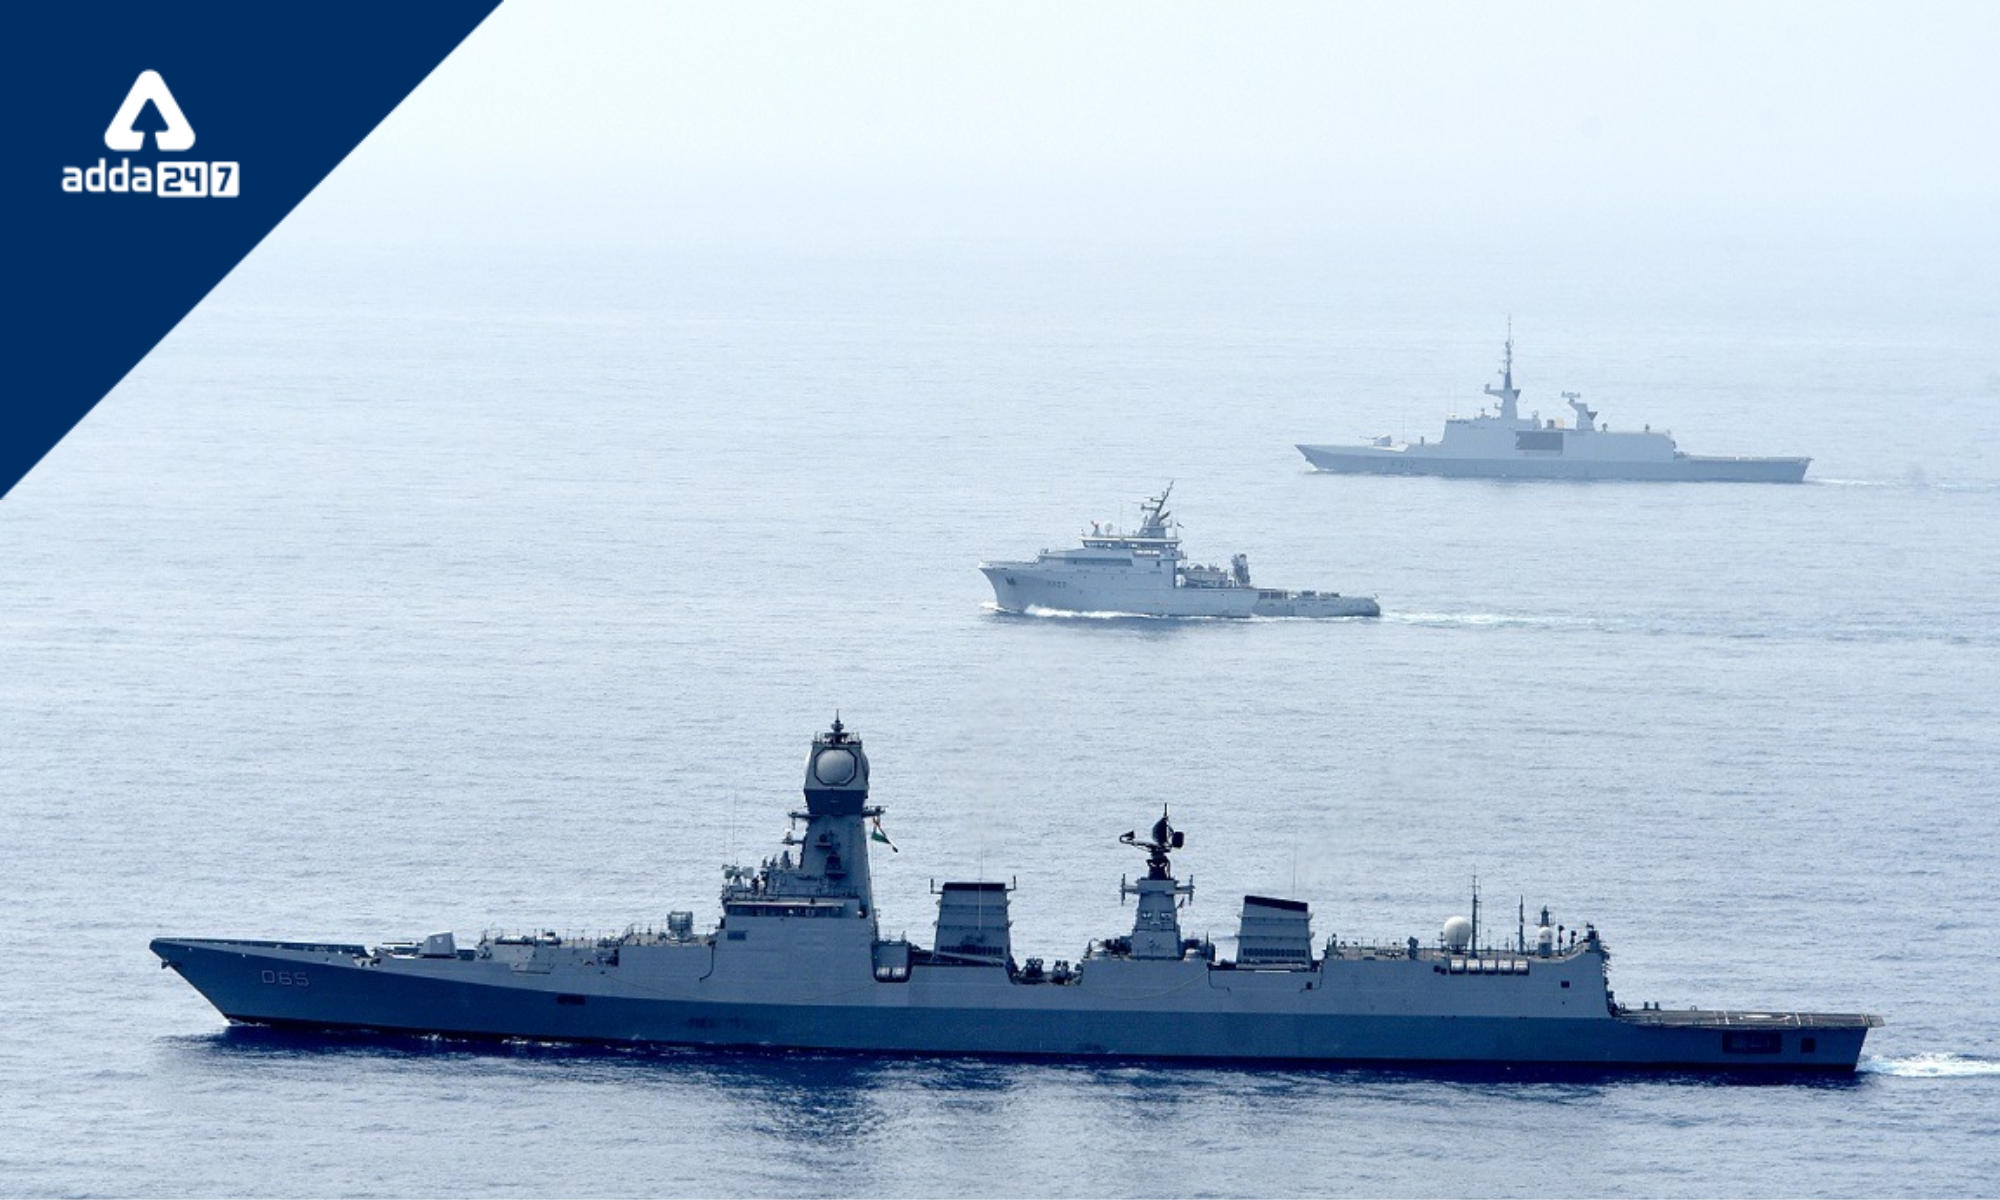 UAE, France, and India conduct discussions for maritime security_50.1